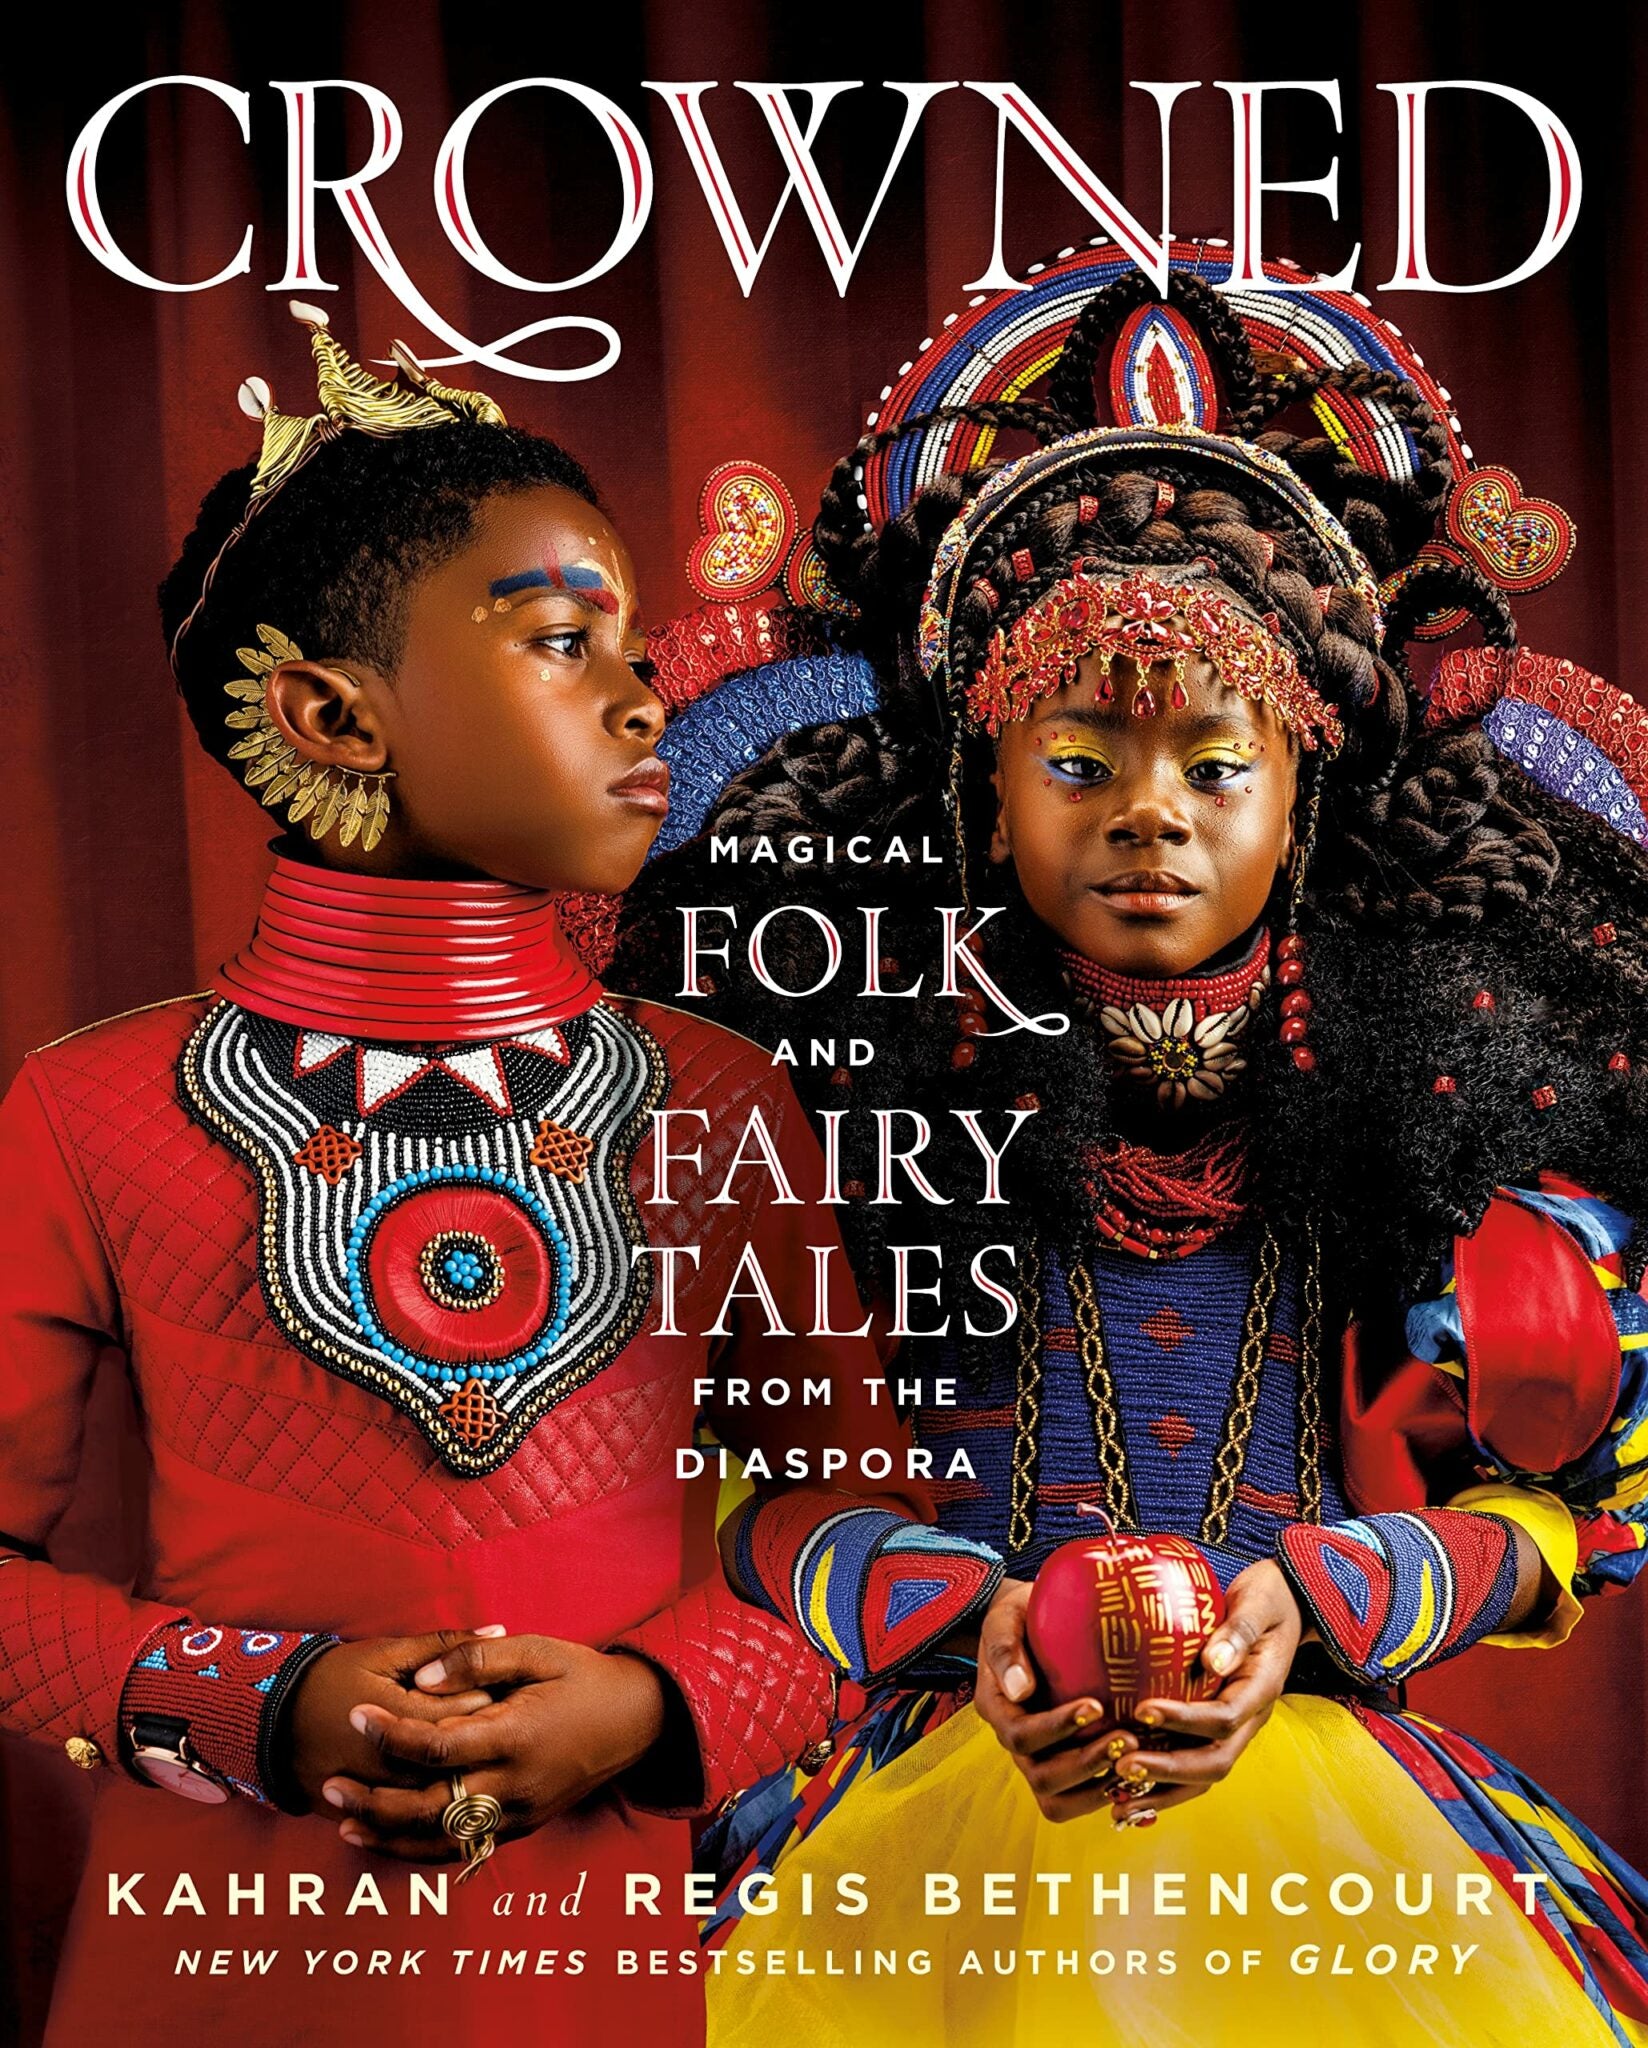 CROWNED: Magical Folk and Fairy Tales from the Diaspora (Hardcover)